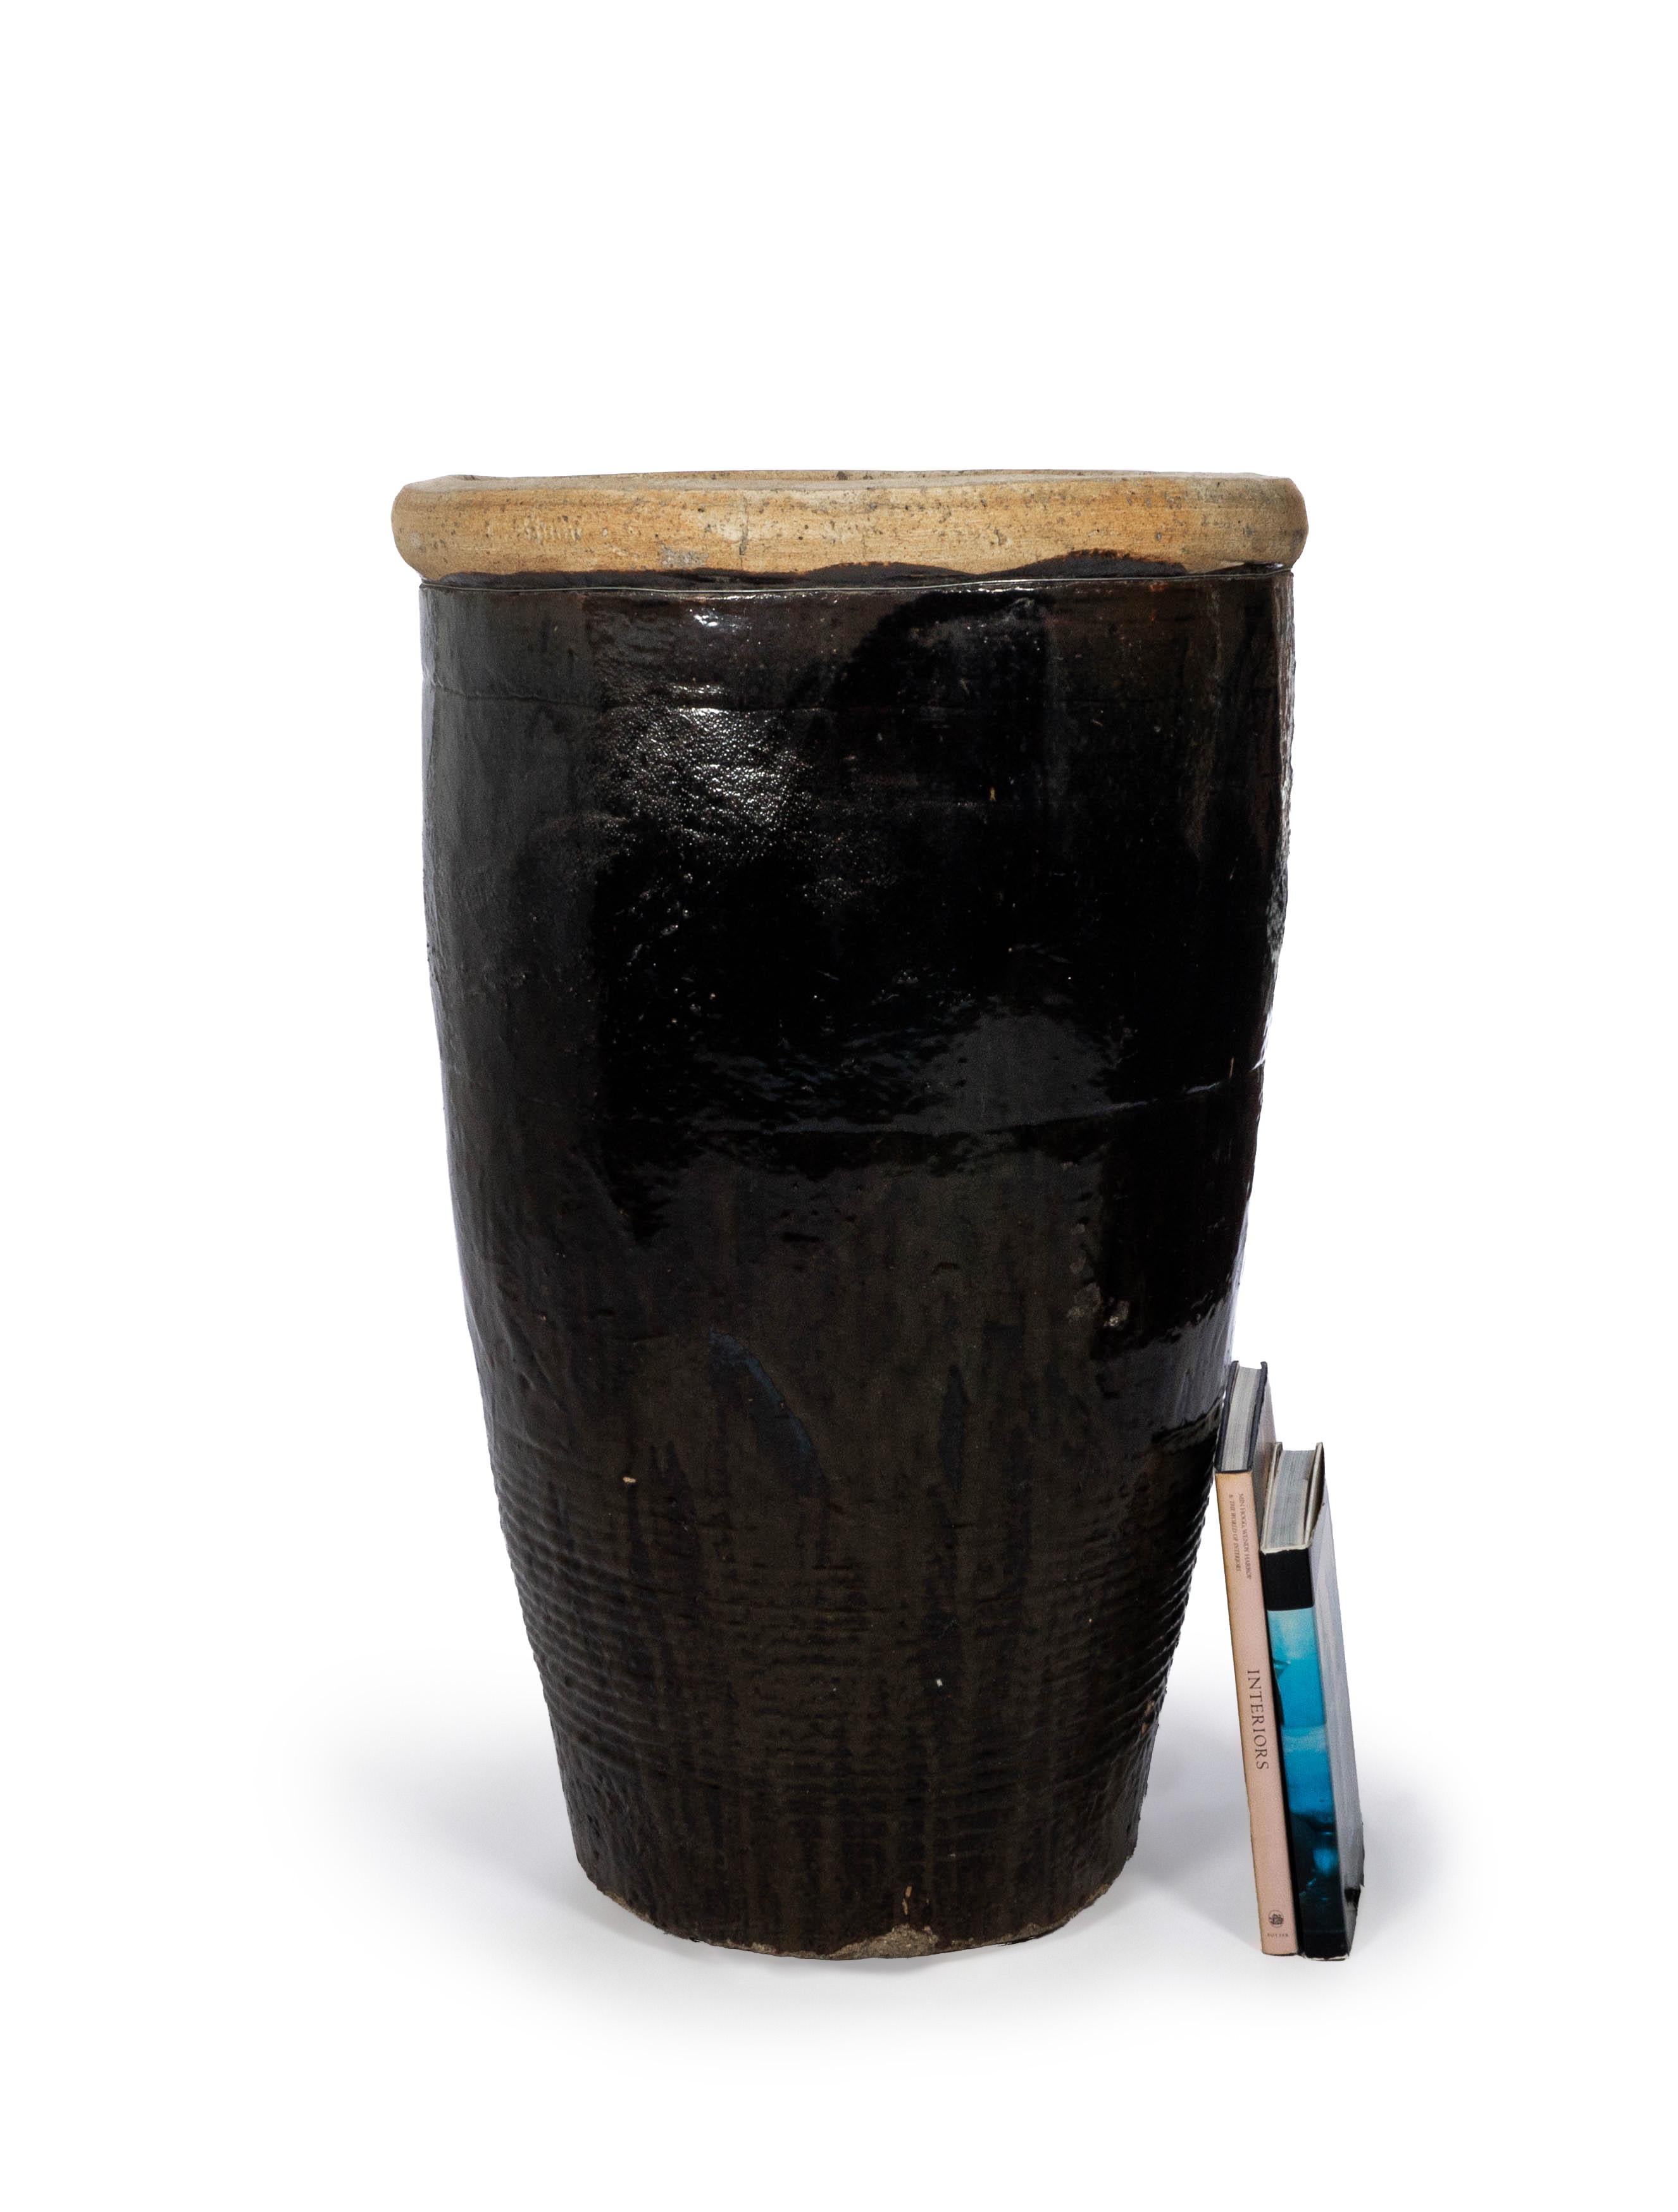 This storage jar features a beautiful sand-colored, textured lip and a glossy dark chocolate, black colored glaze throughout its length.

This piece is a part of Brendan Bass’s one-of-a-kind collection, Le Monde. French for “The World”, the Le